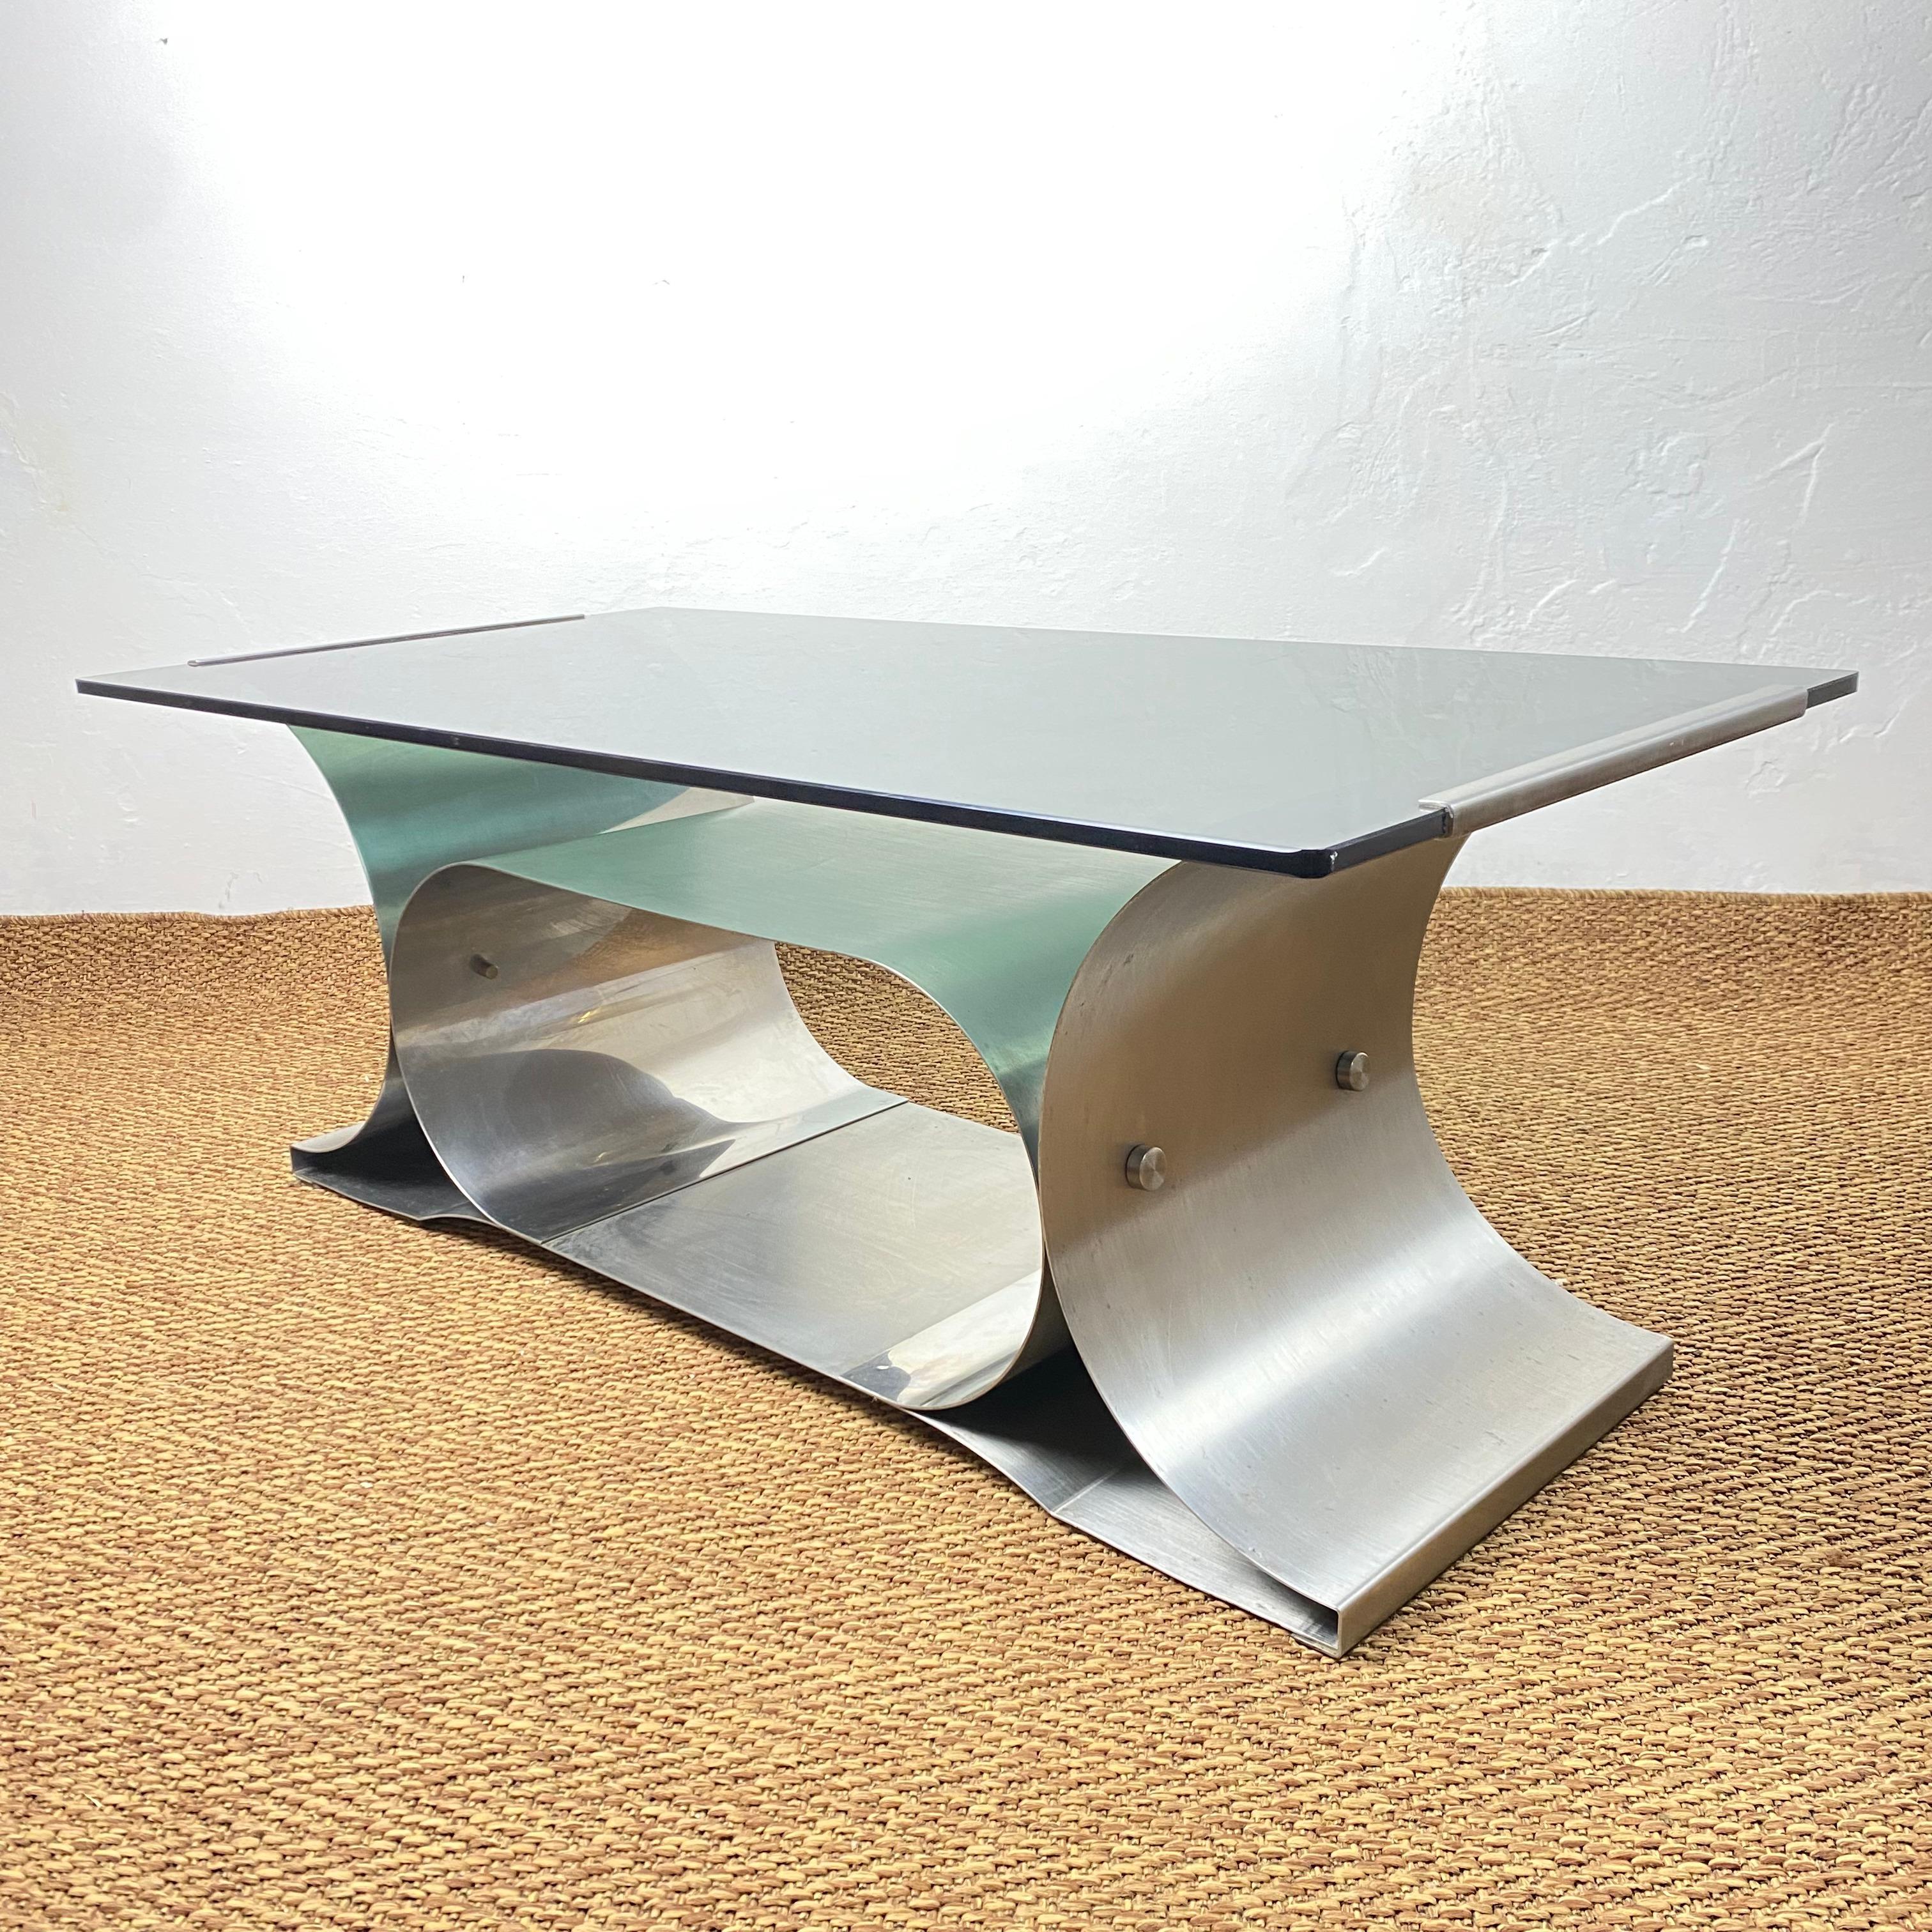 Superb coffee table attributed to François Monnet and produced by Kappa in the 70s in France, curved metal and smoked glass in excellent condition.
Very rare piece from Kappa production, perfect condition, only 2 tiny scratches on the glass as